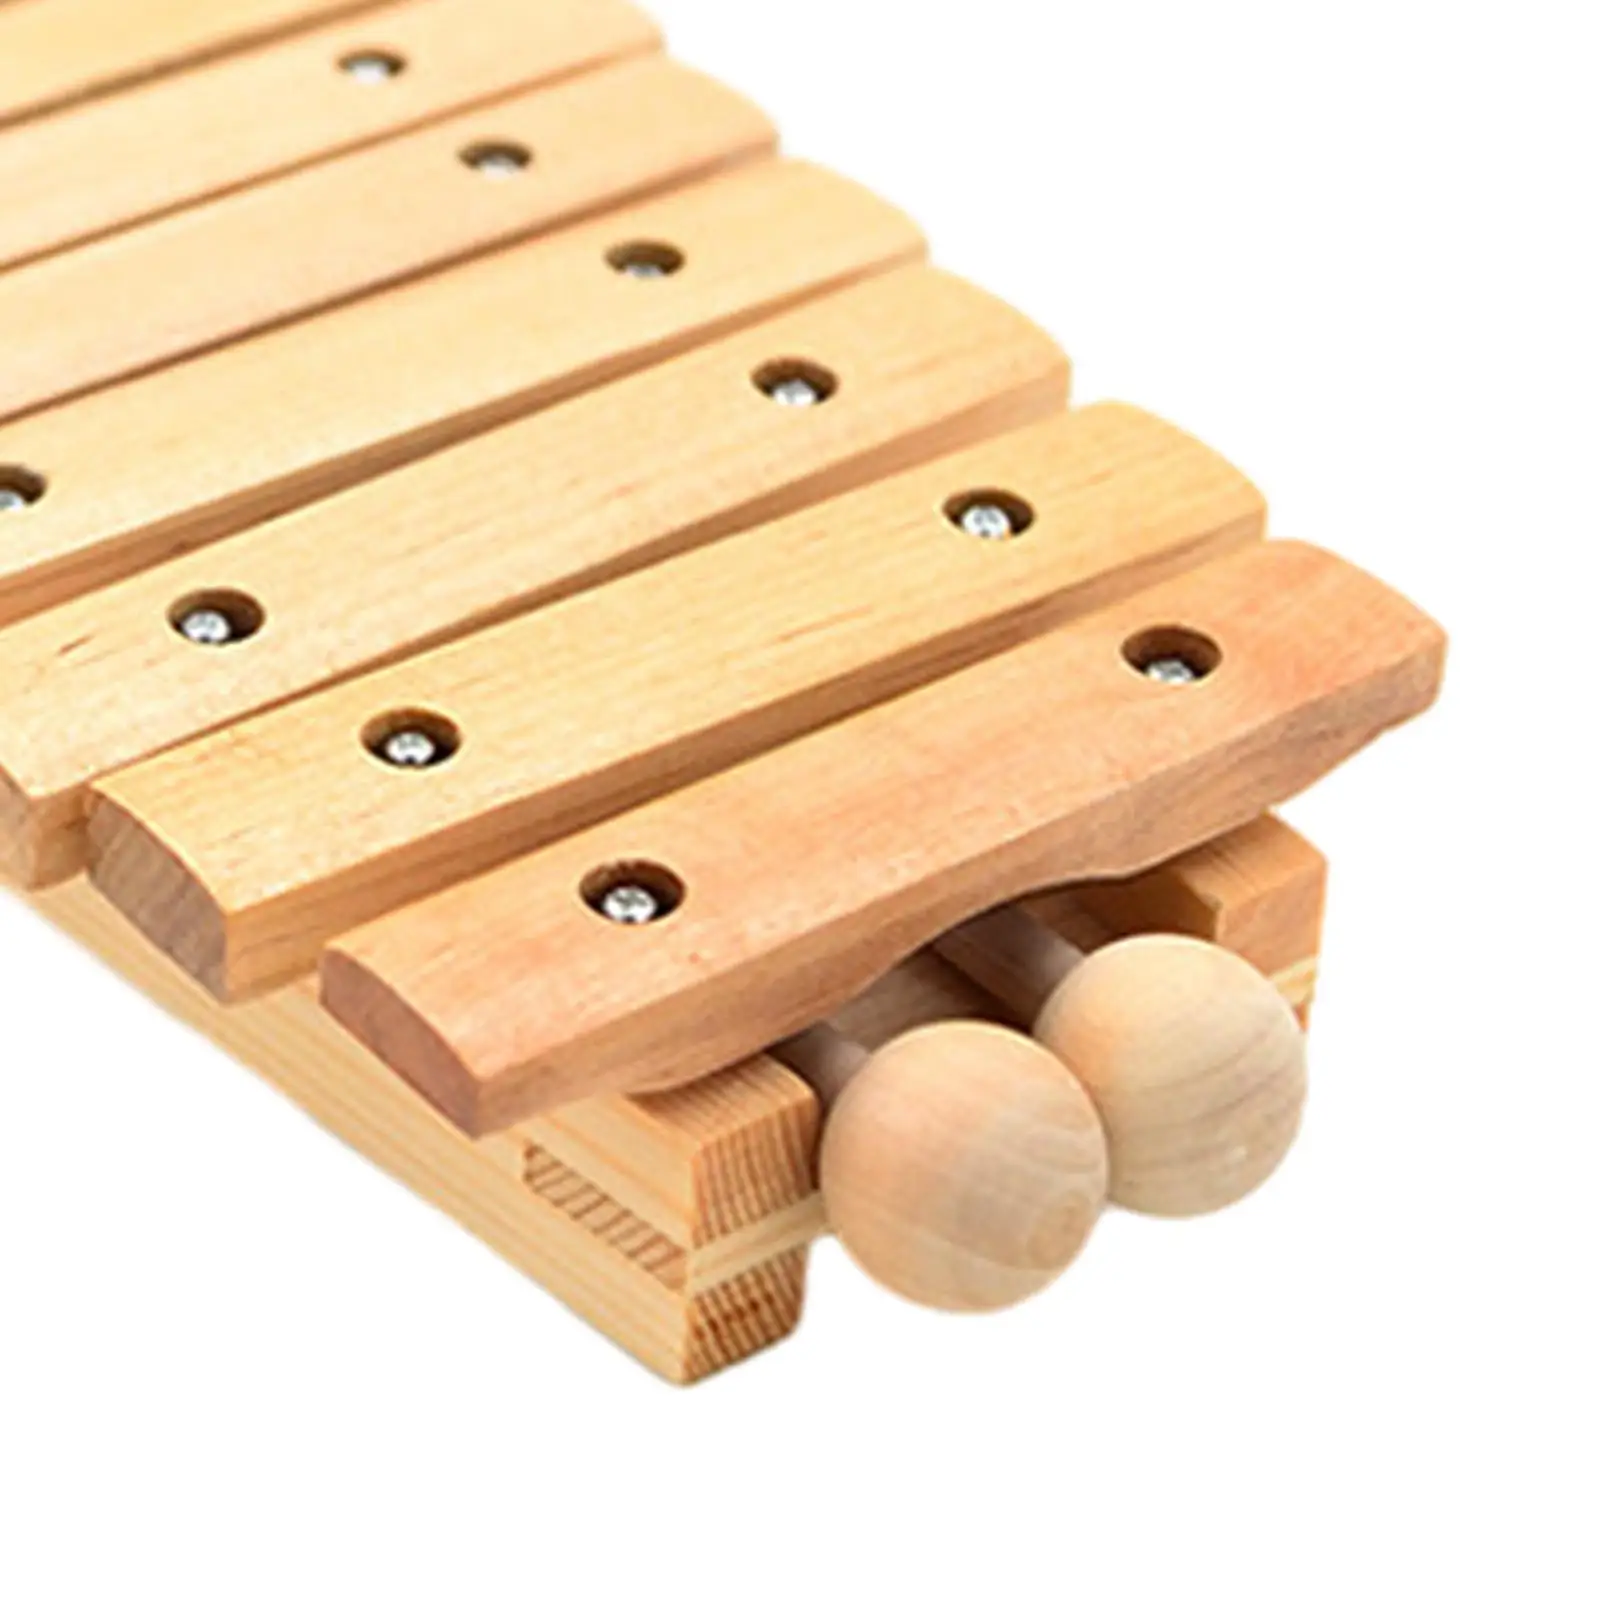 13 Note Wood Xylophone Music Enlightenment Coordination Hand Percussion Percussion Instrument for Music Lessons Concert Outside